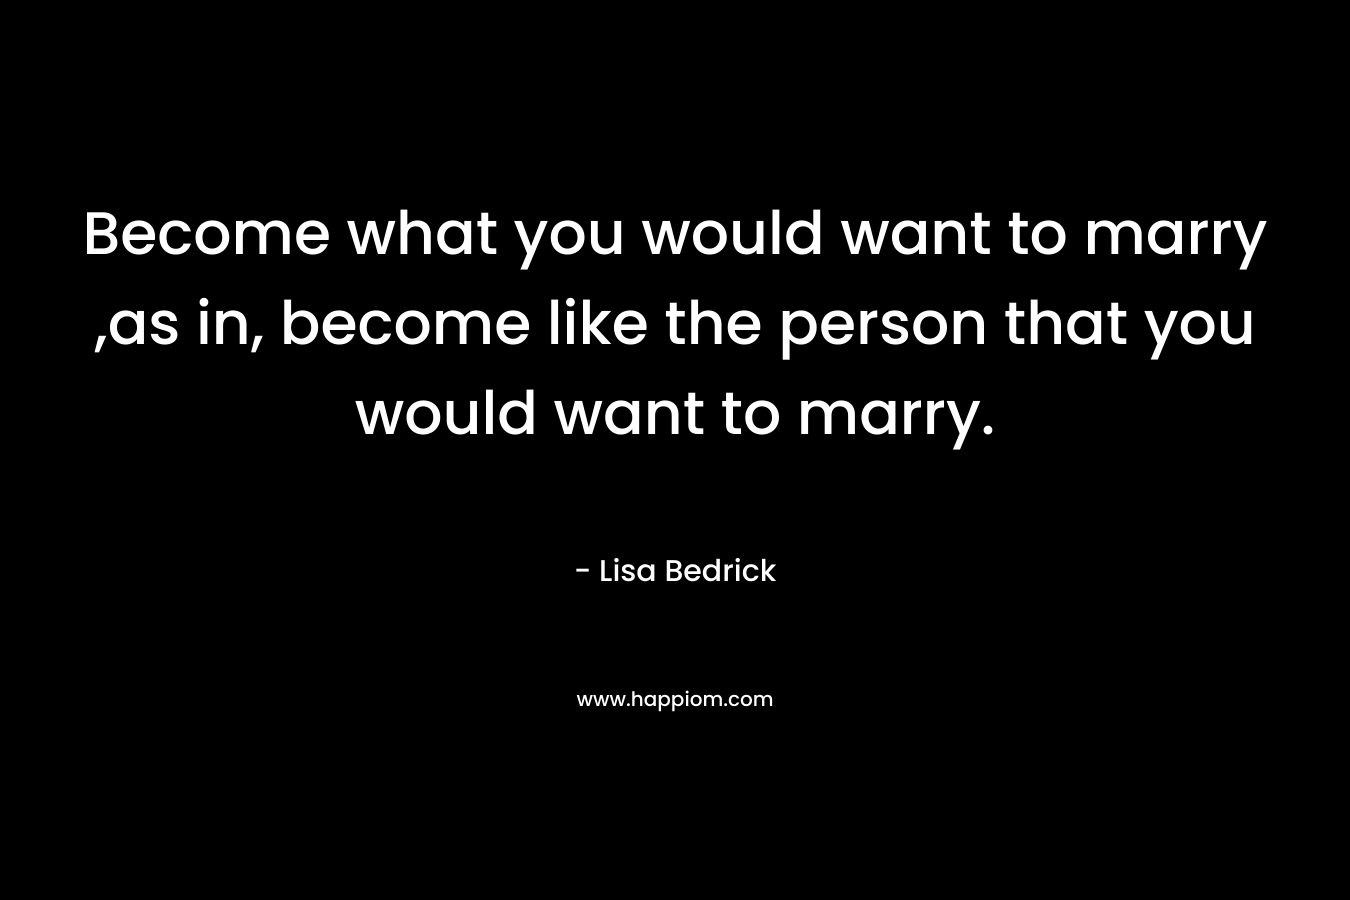 Become what you would want to marry ,as in, become like the person that you would want to marry.